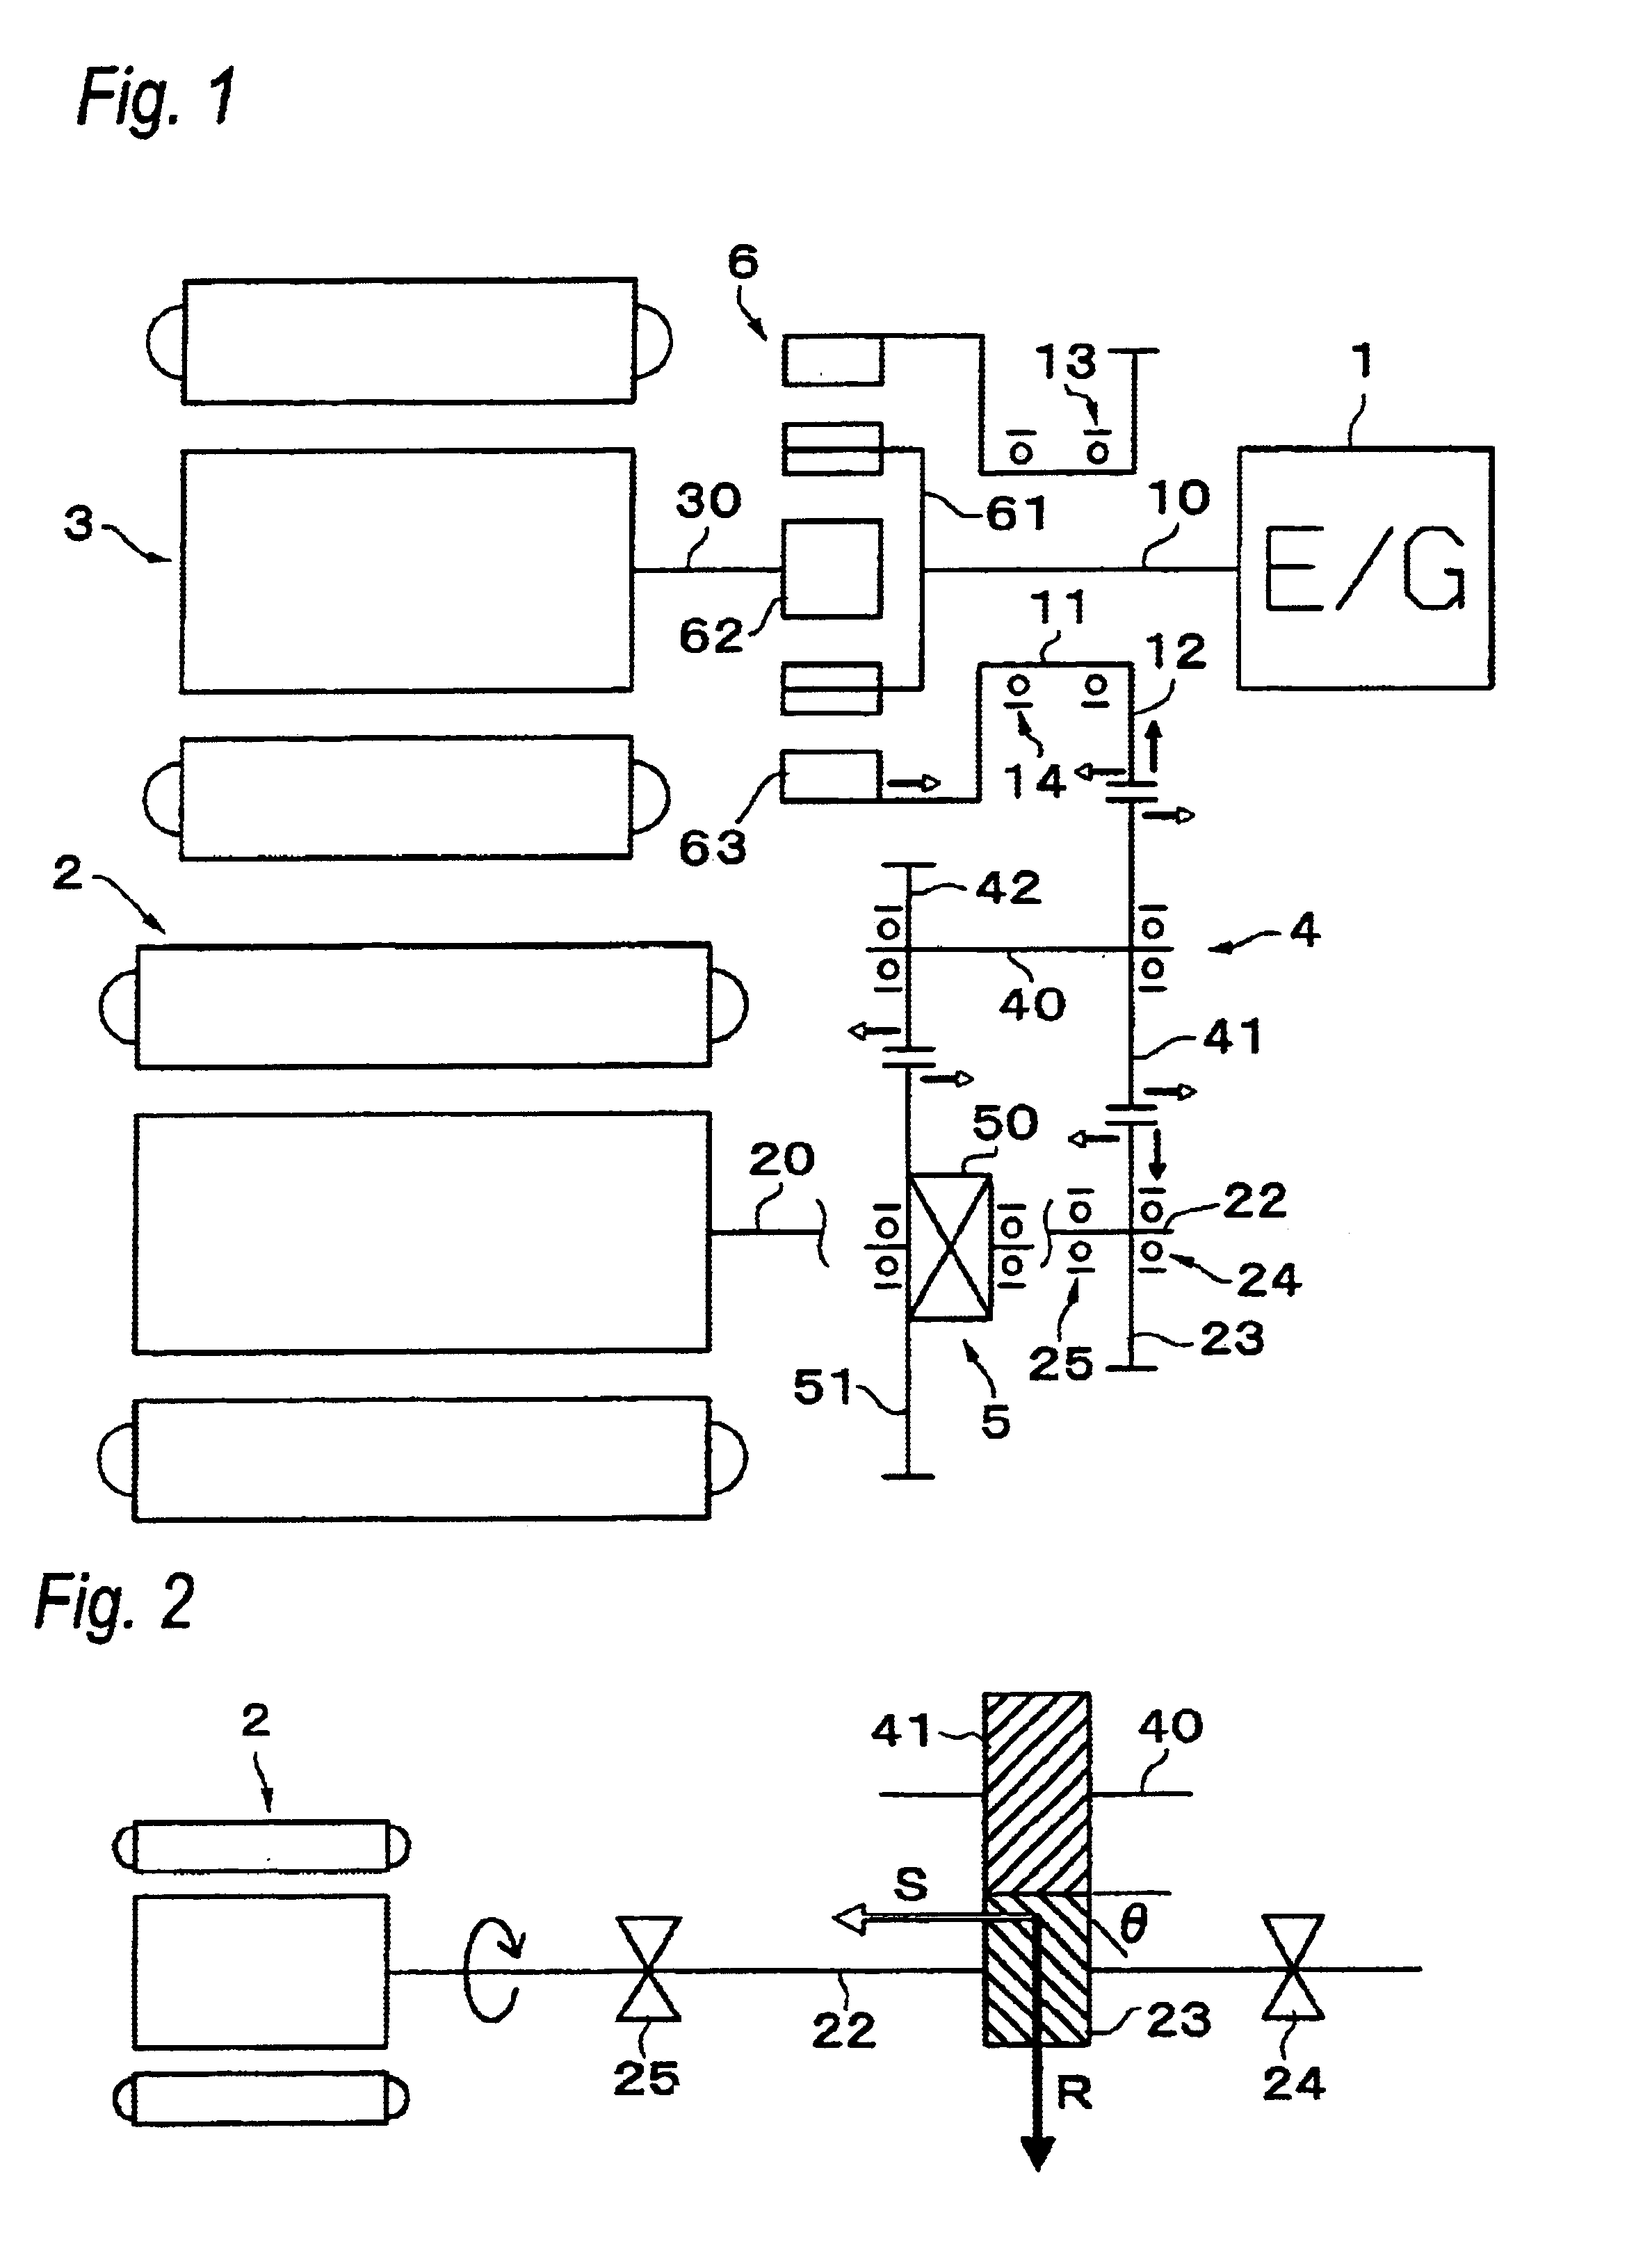 Driving apparatus having a shaft support structure